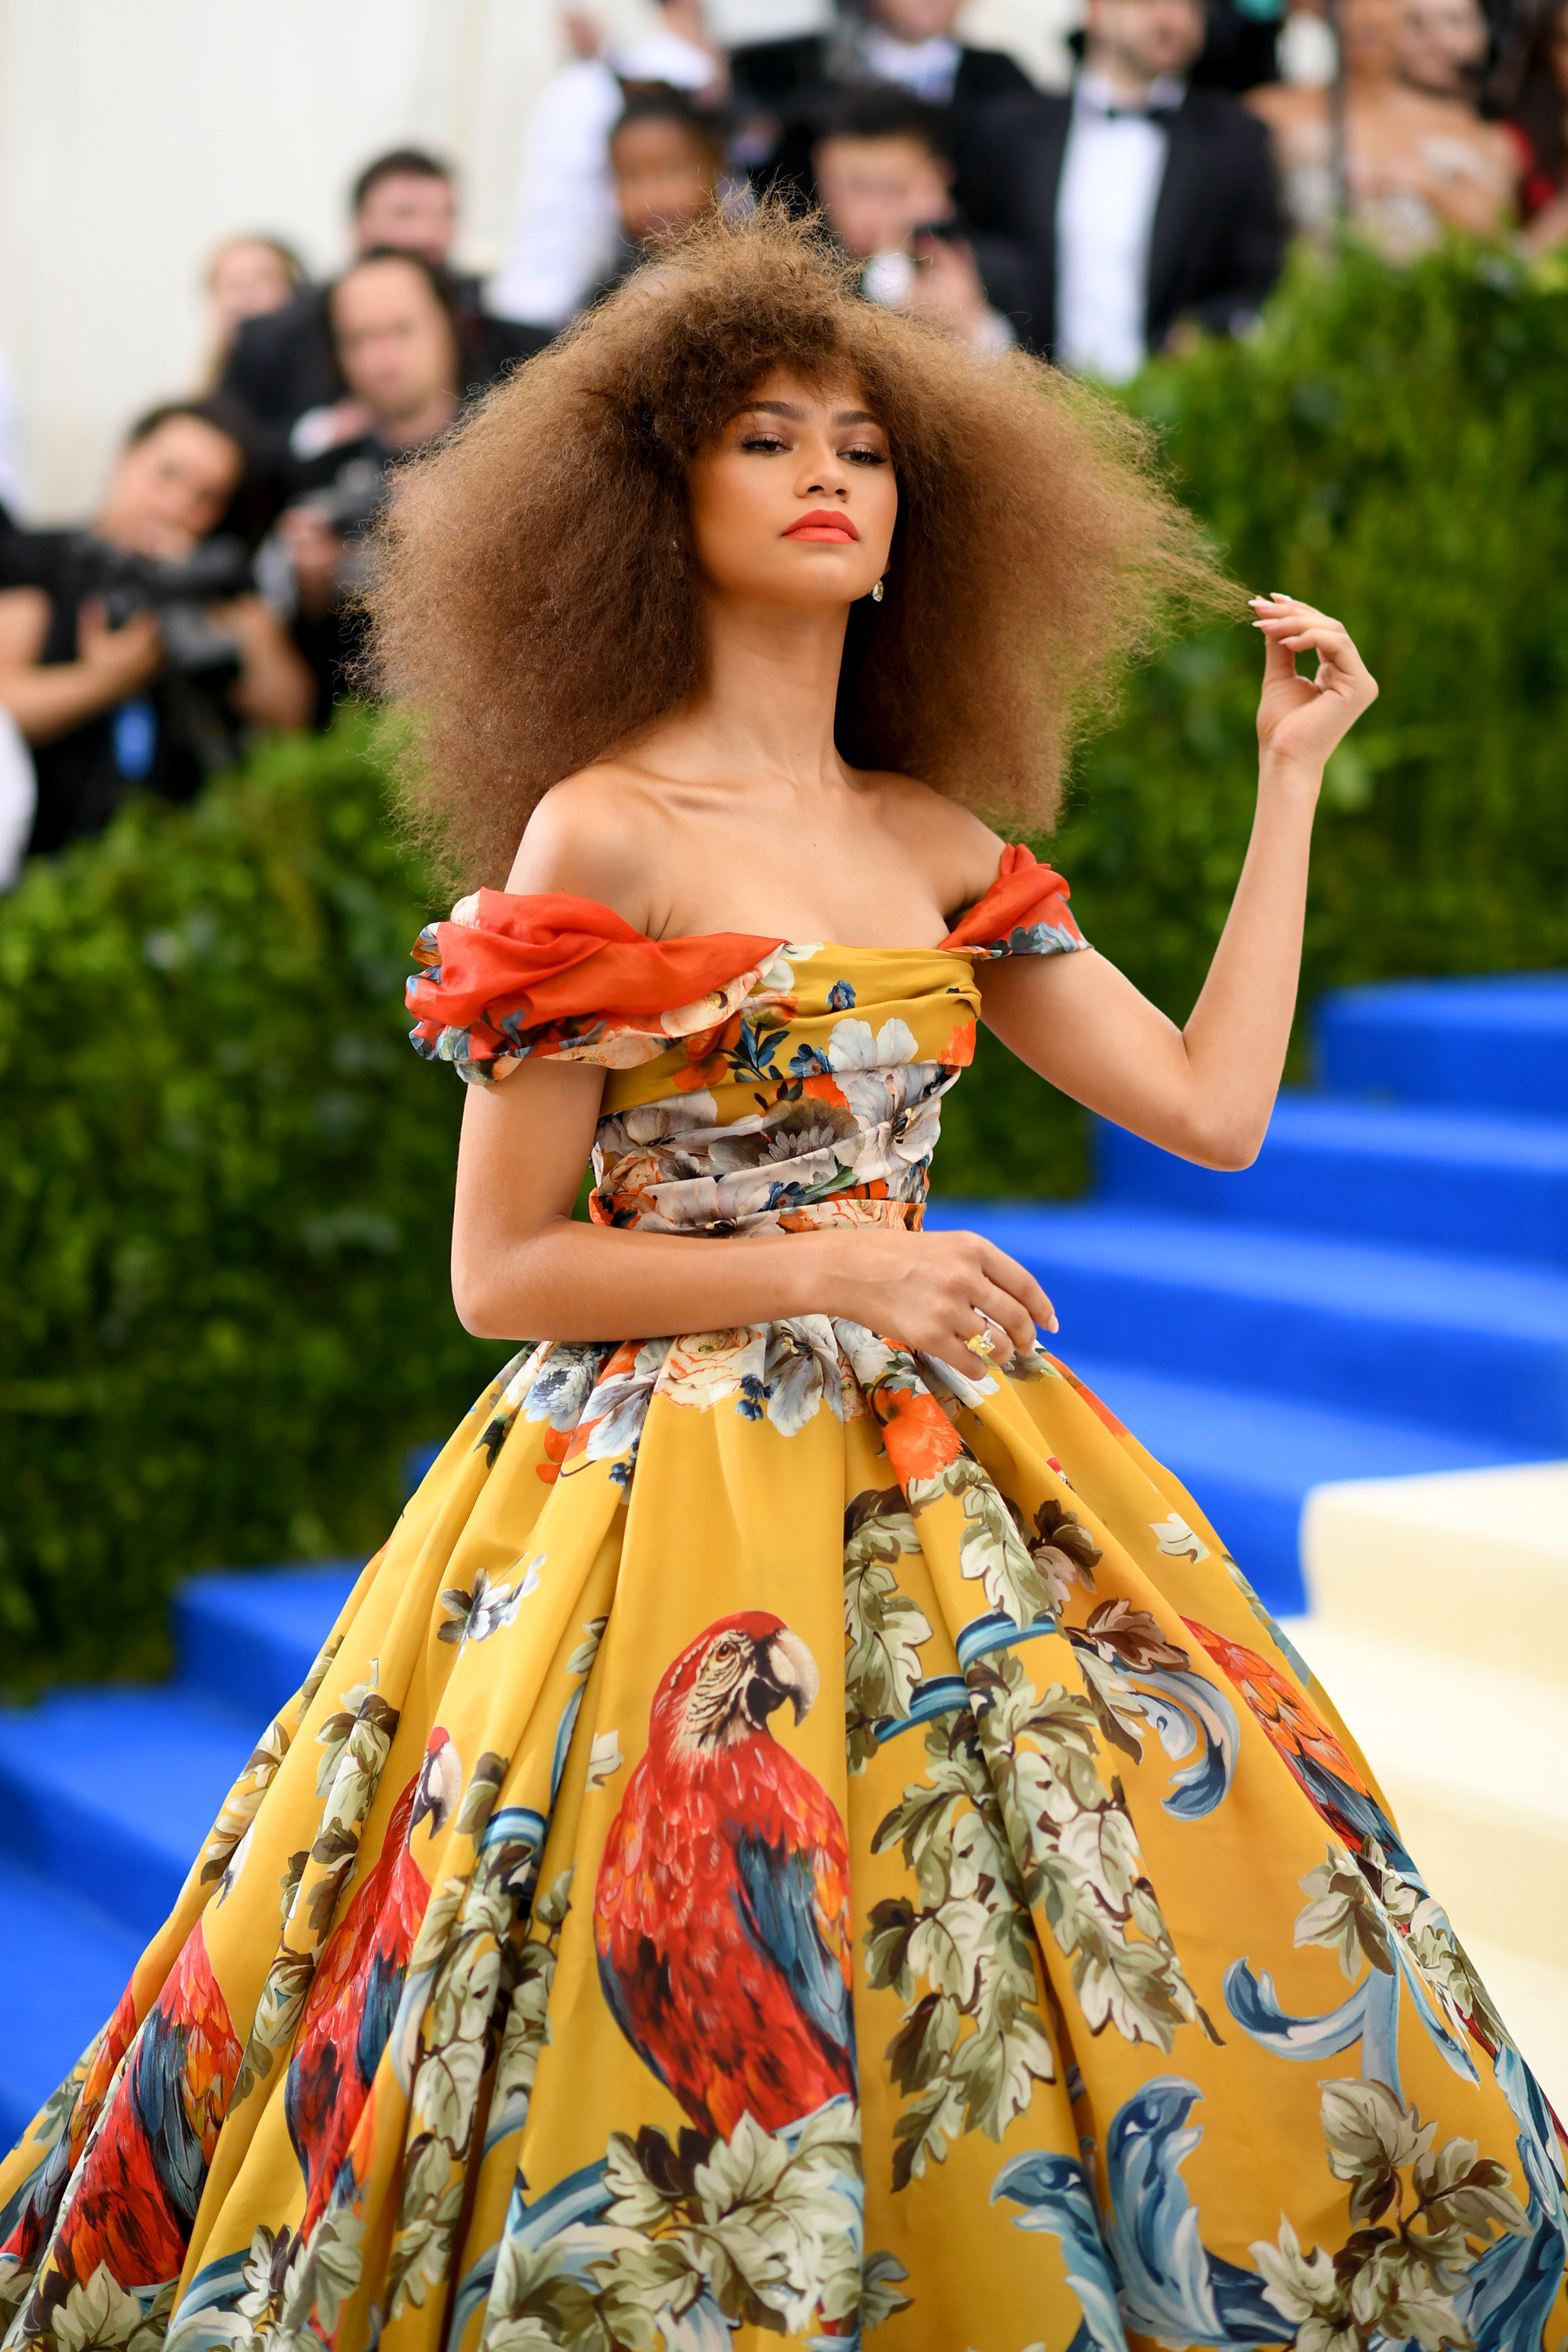 Zendaya arriving at the Met Gala with her hair styled in an afro and wearing an off the shoulder gown with parrots on it. 